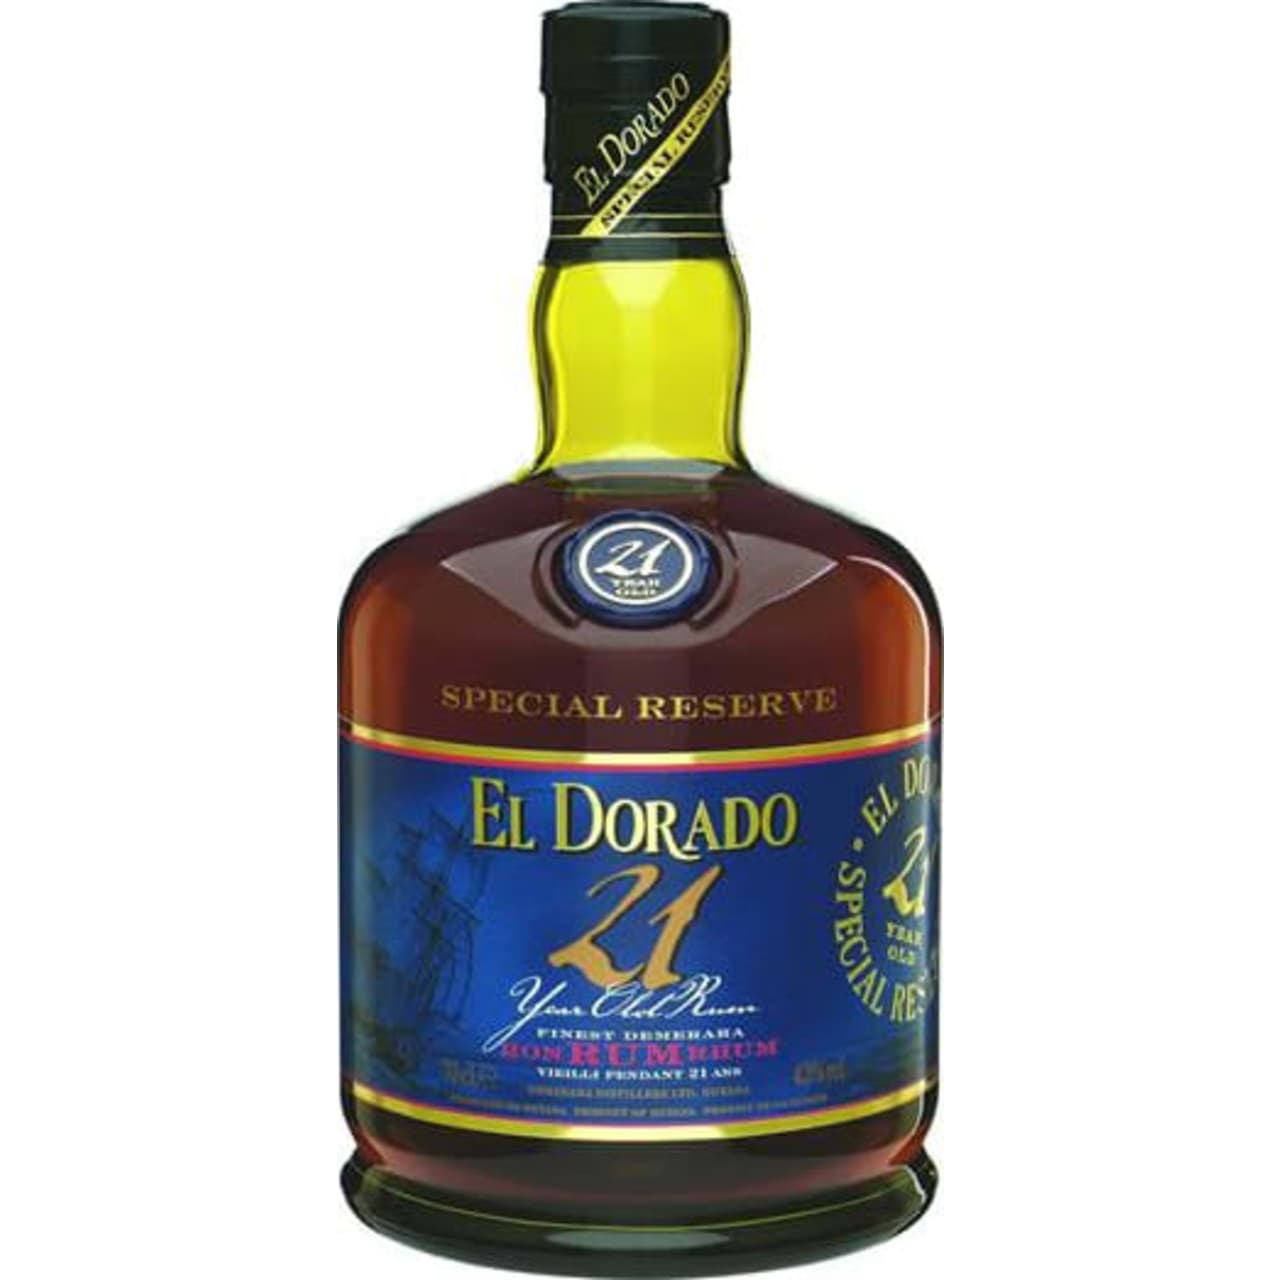 El Dorado Special Reserve is an excellent blend made from different rums in Guyana. These are aged between 21 and 25 years. Naturally matured in oak barrels at a constant 6 degrees Celsius, this rum meets all your expectations.